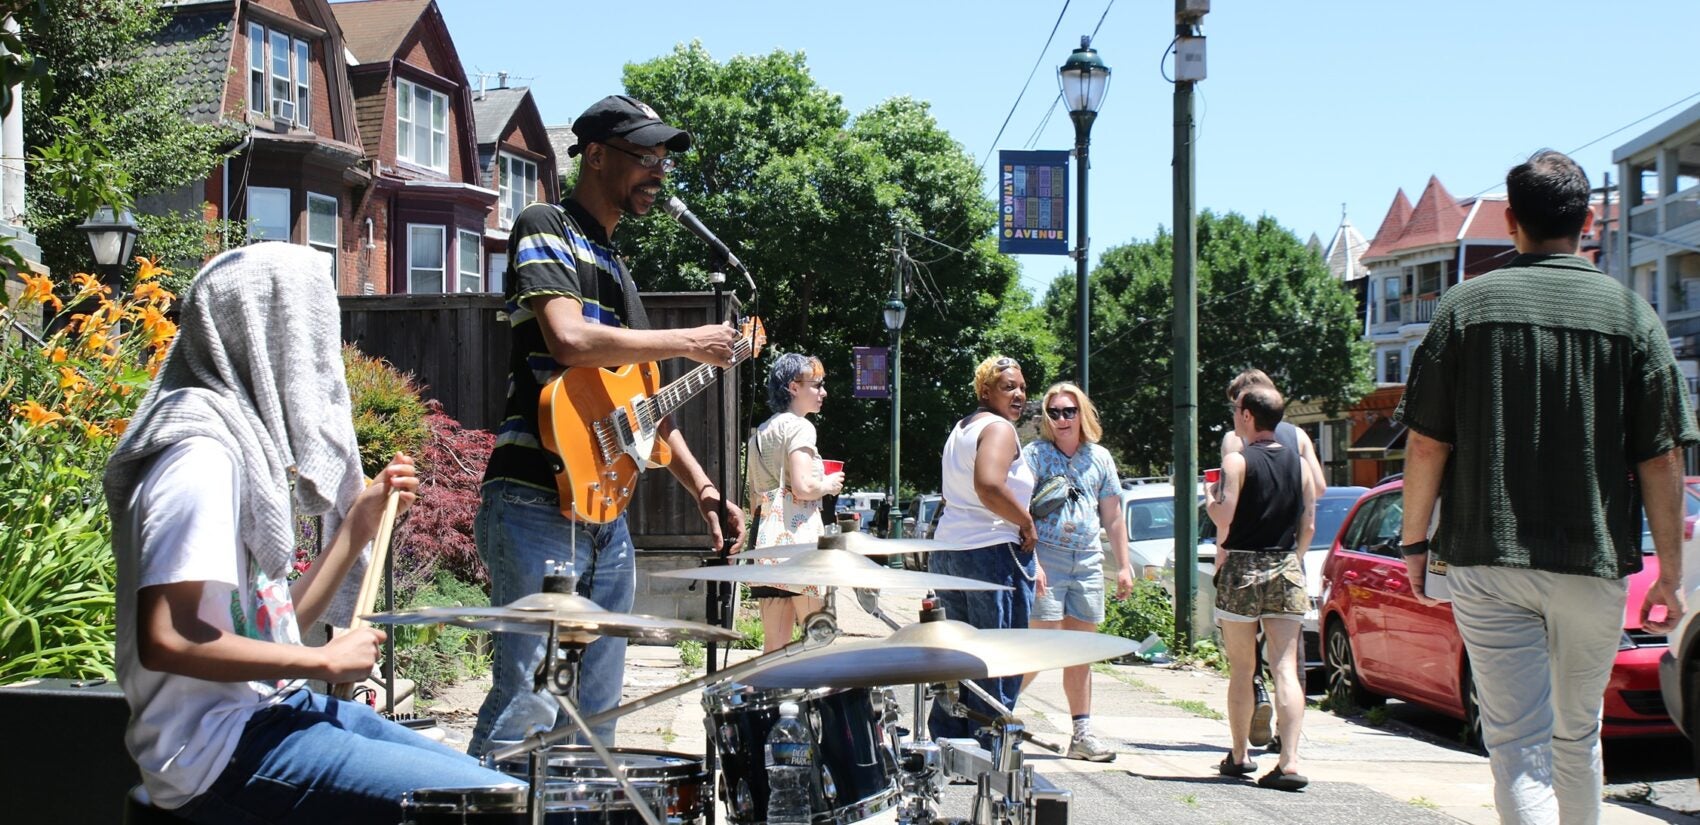 Porchfest attendees watch two people play guitar and drums